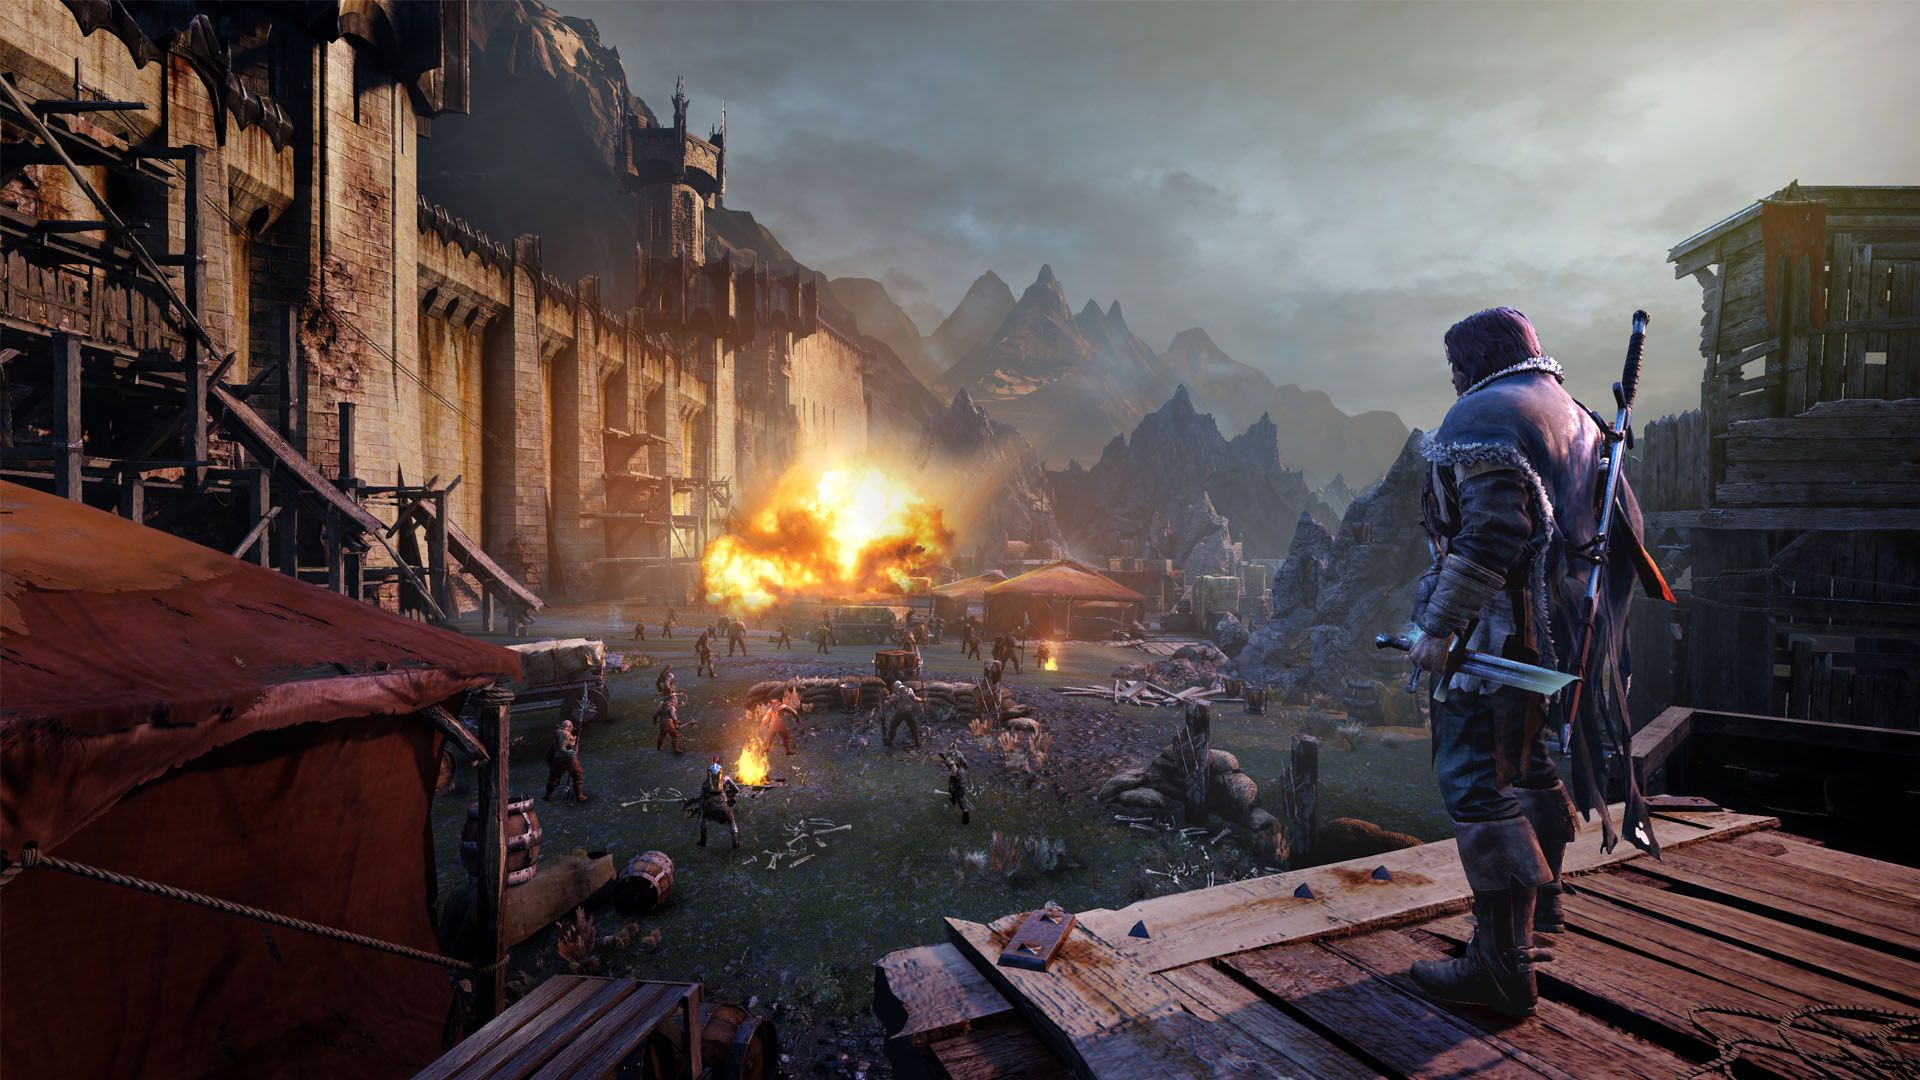 Скриншот *Middle-earth: Shadow of Mordor - Game of the Year Edition [PS4] 5.05 / 6.72 / 7.02 [EUR] (2014) [Русский] (v1.03)*